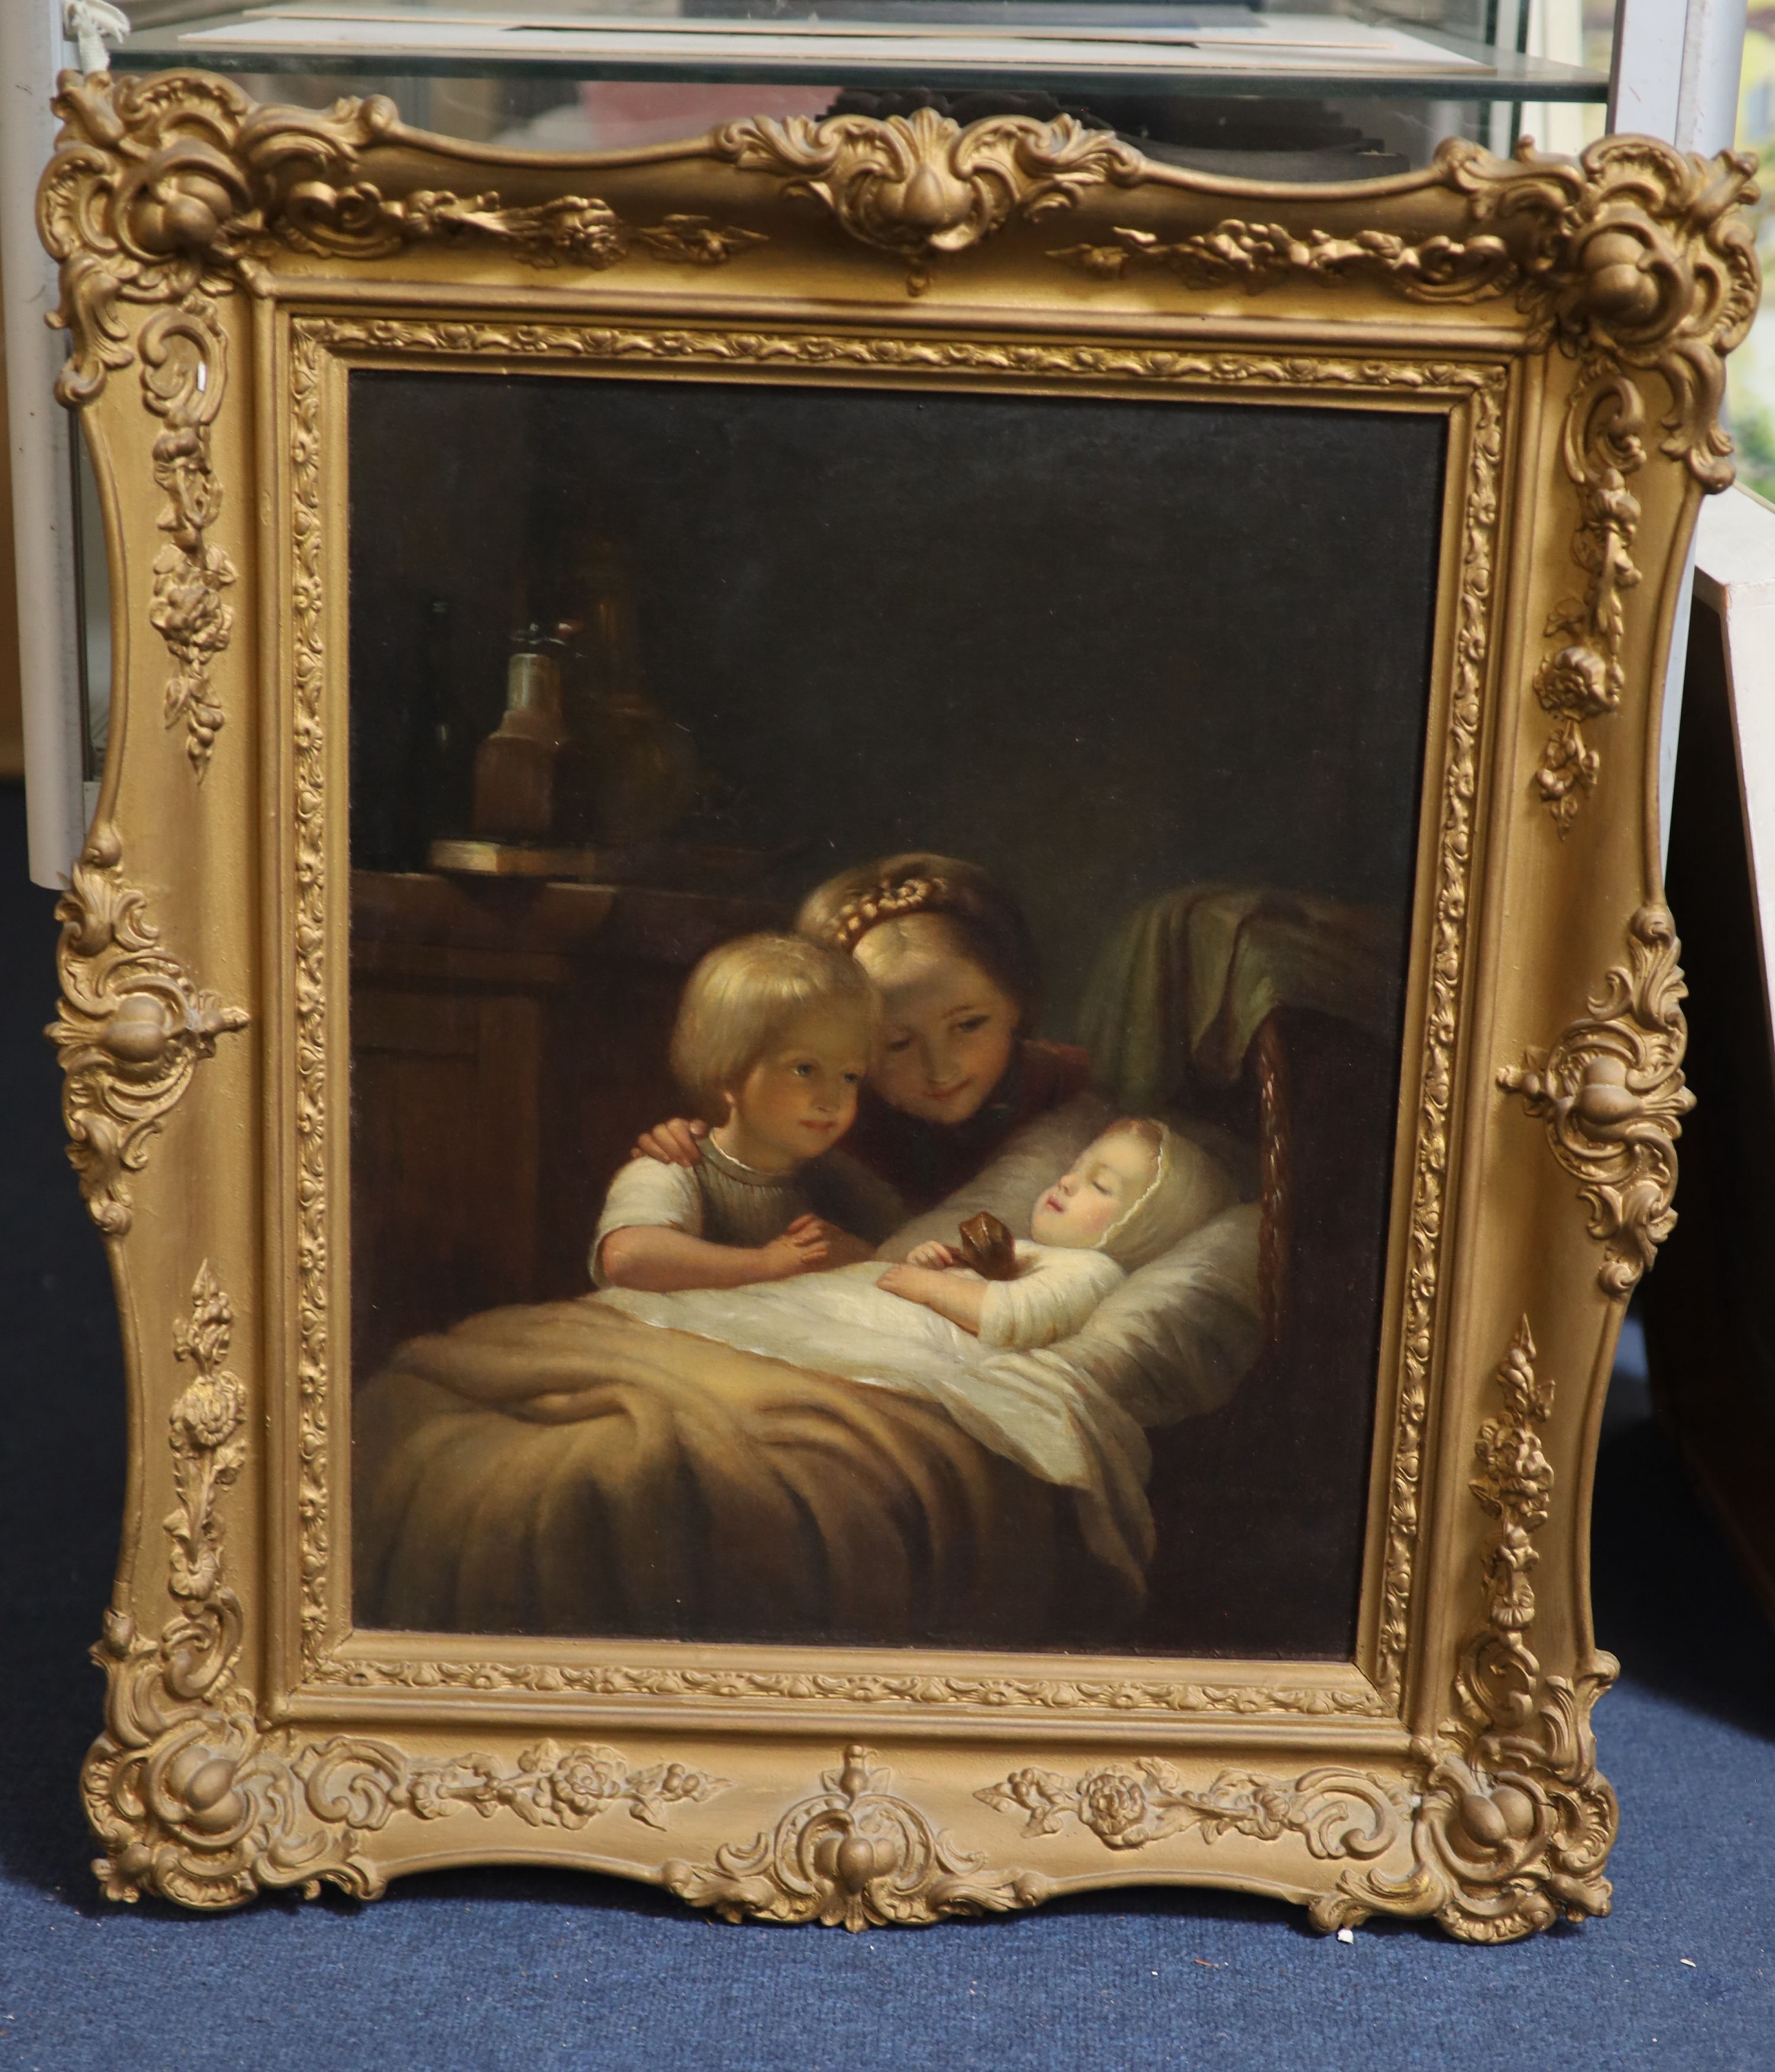 19th century German School, Two children looking at a sleeping baby, oil on canvas, 46.5 x 37.5cm